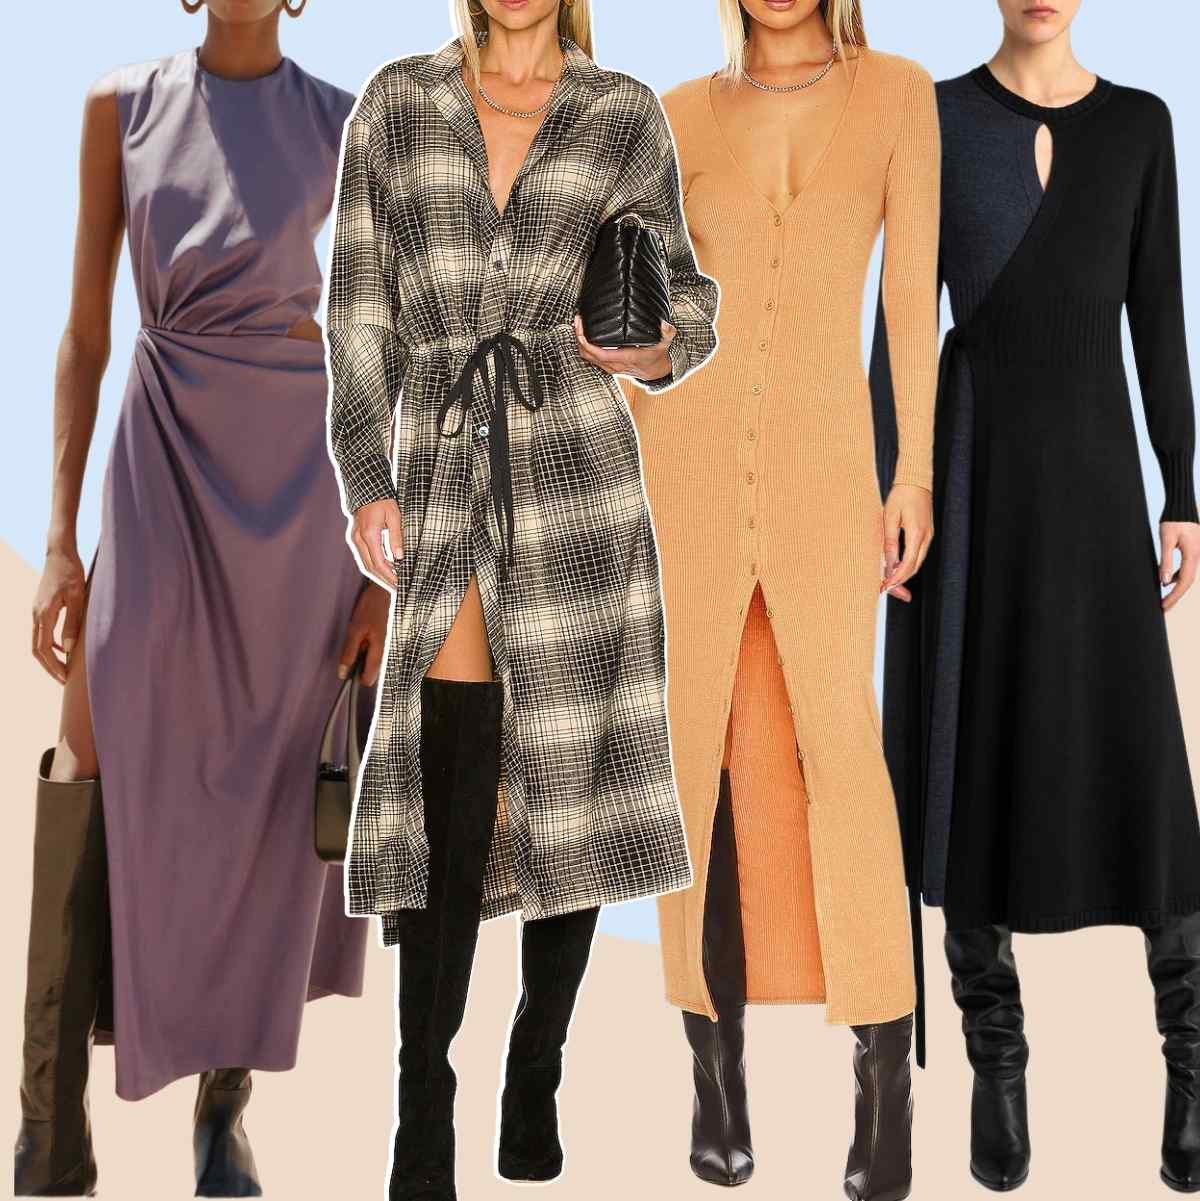 Collage of 5 women wearing thigh high boots outfits with midi and maxi dresses.